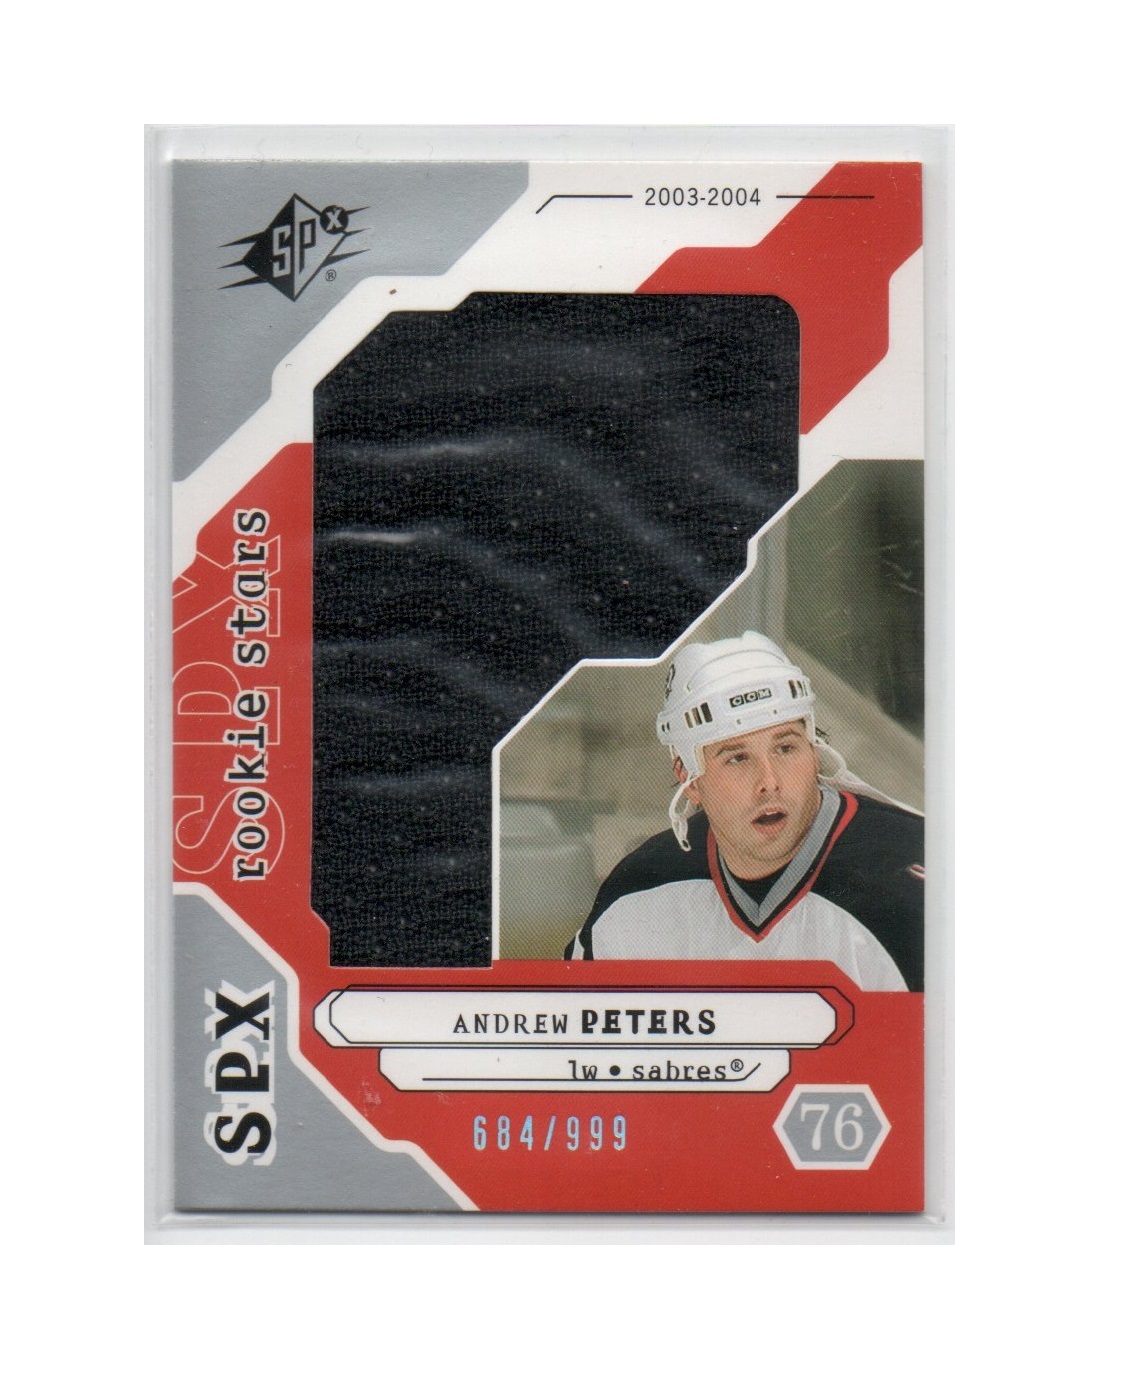 2003-04 SPx #204 Andrew Peters JSY RC (30-X153-GAMEUSED-RC-SERIAL-SABRES)